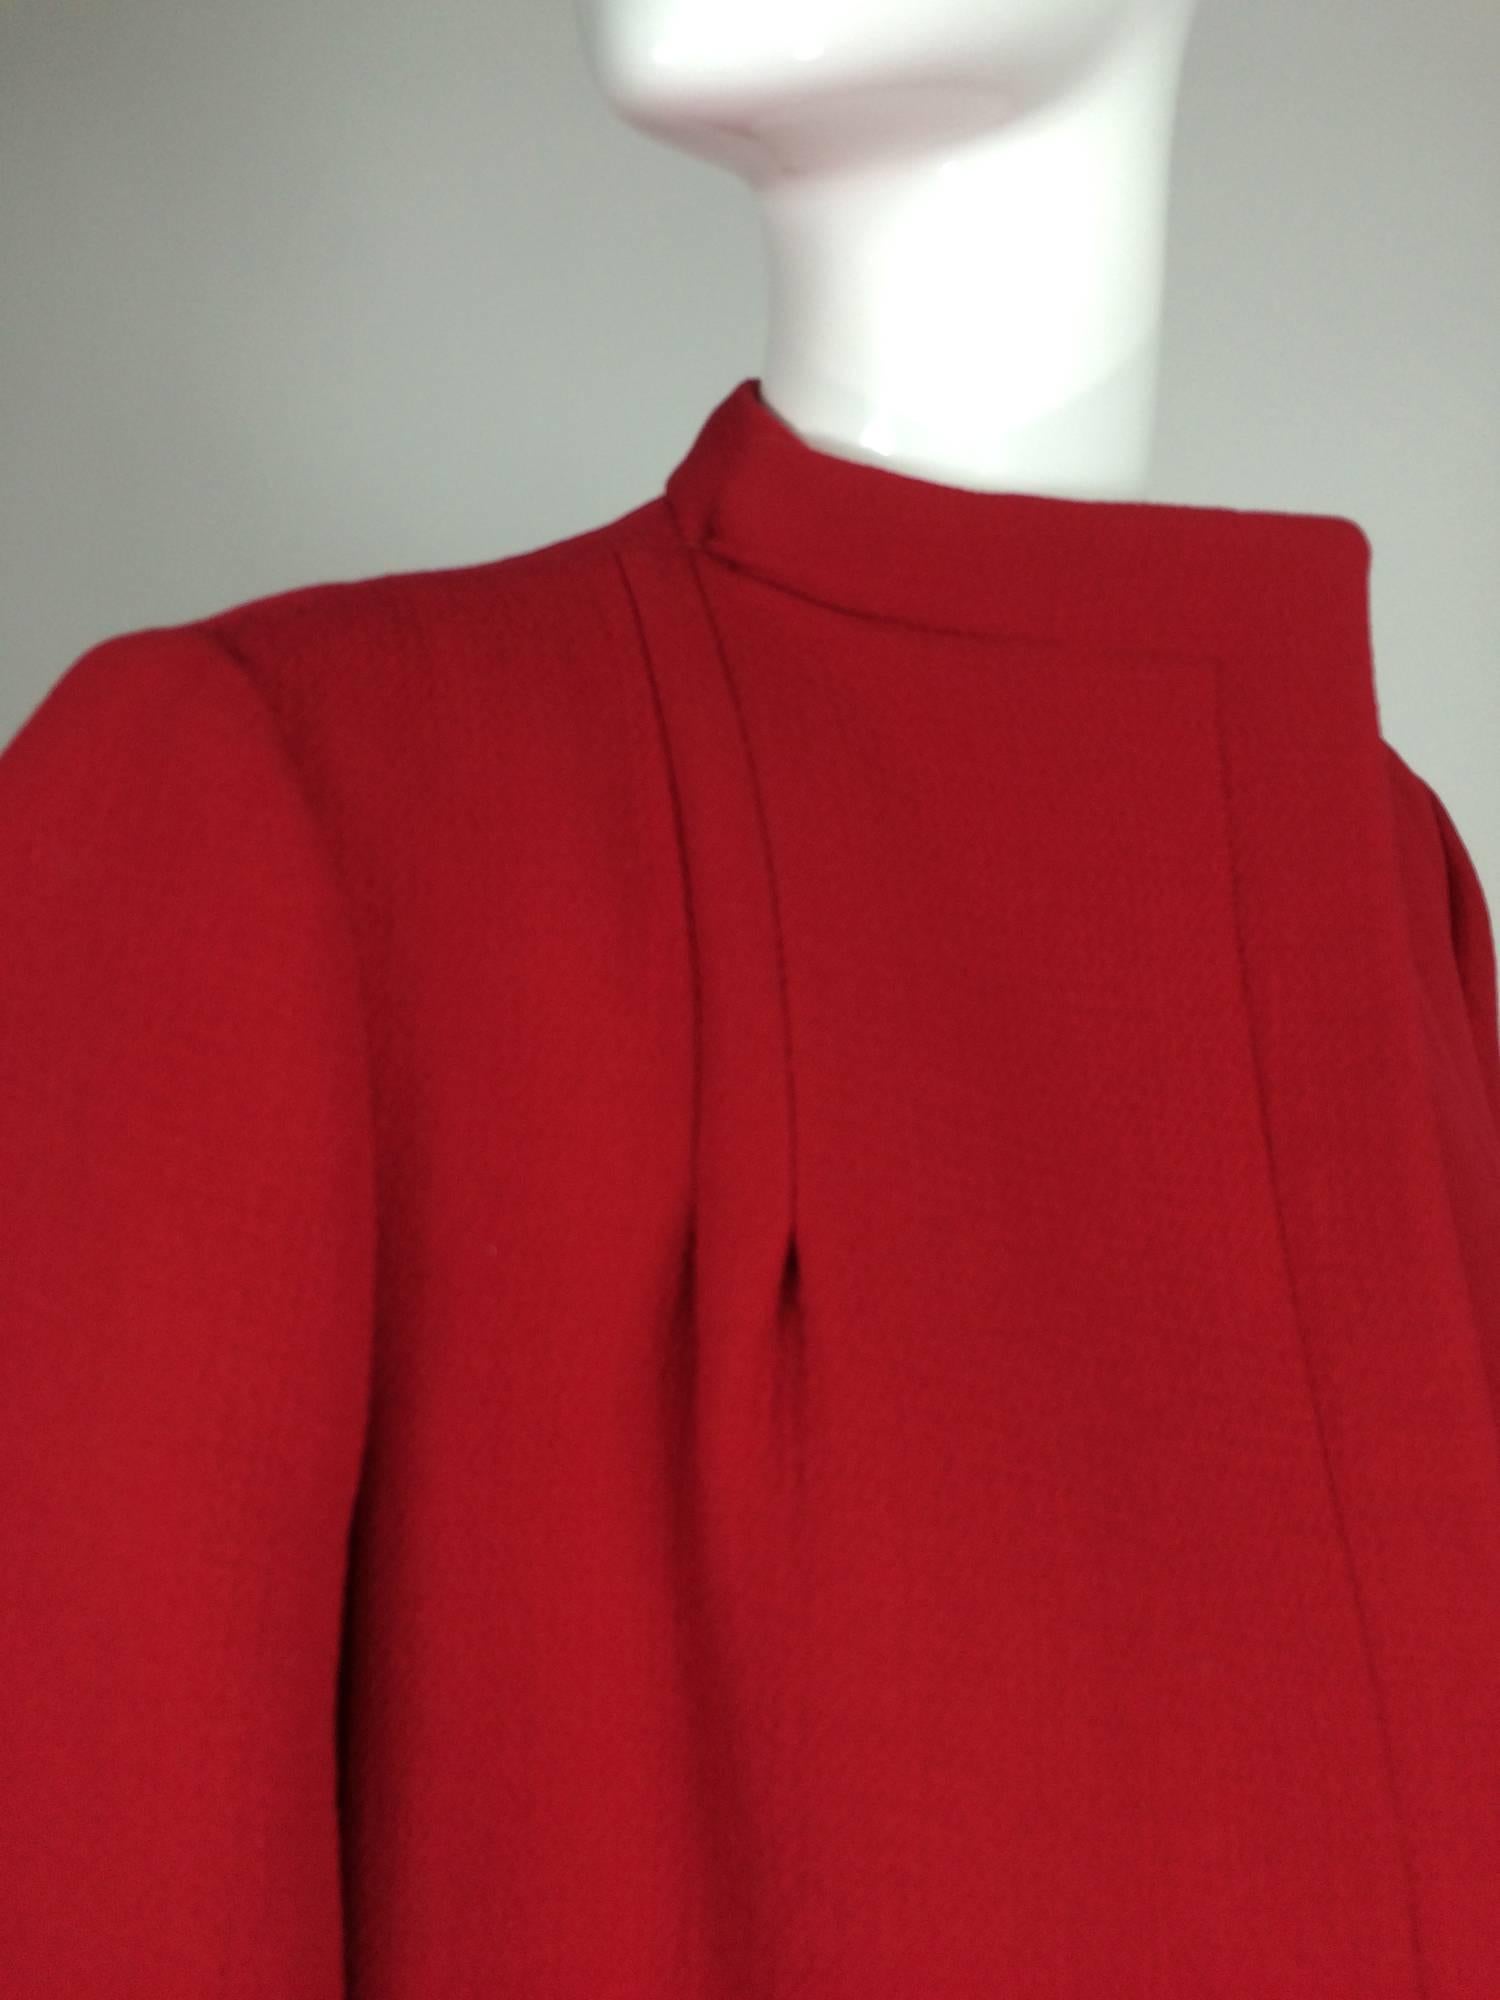 Pauline Trigere chic cherry red wool open front coat 1950s 2